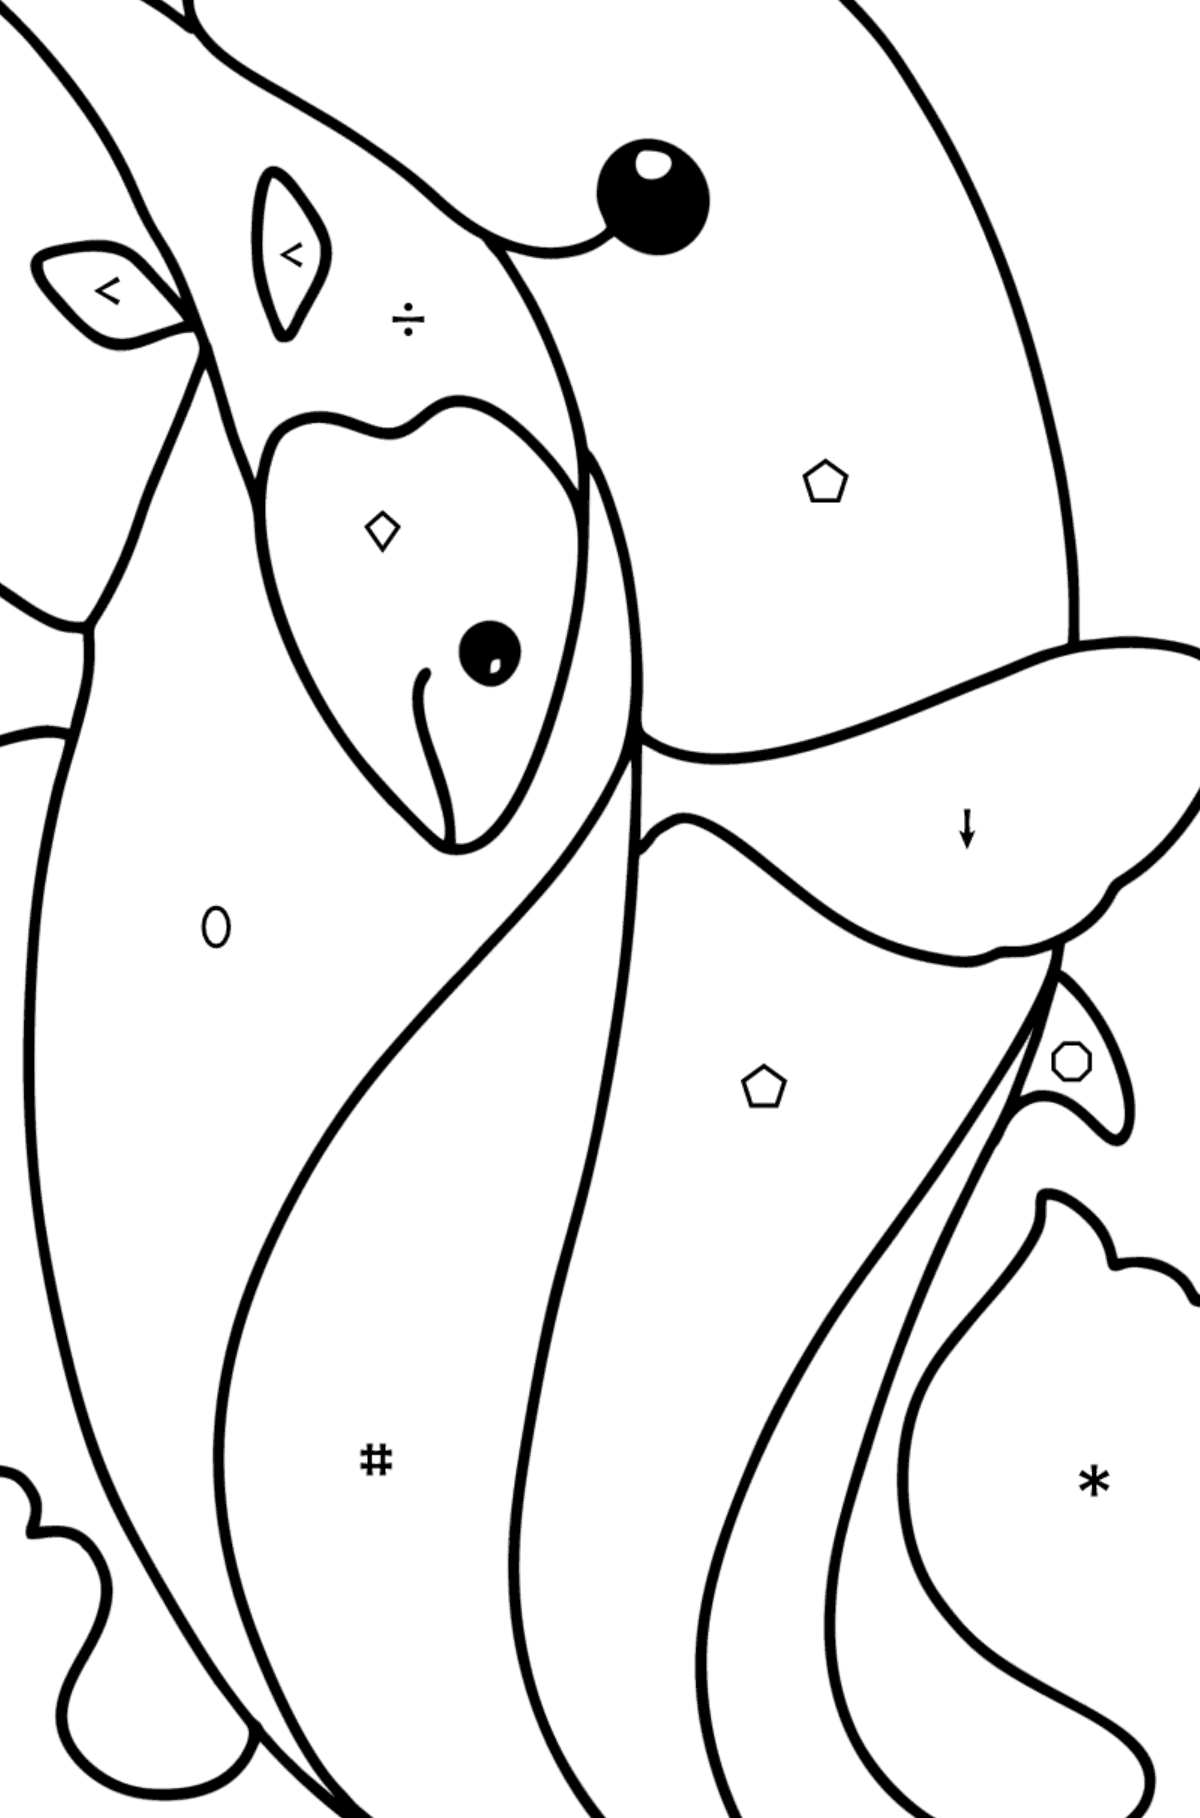 Dolphin Caught a Fish coloring page - Coloring by Symbols and Geometric Shapes for Kids